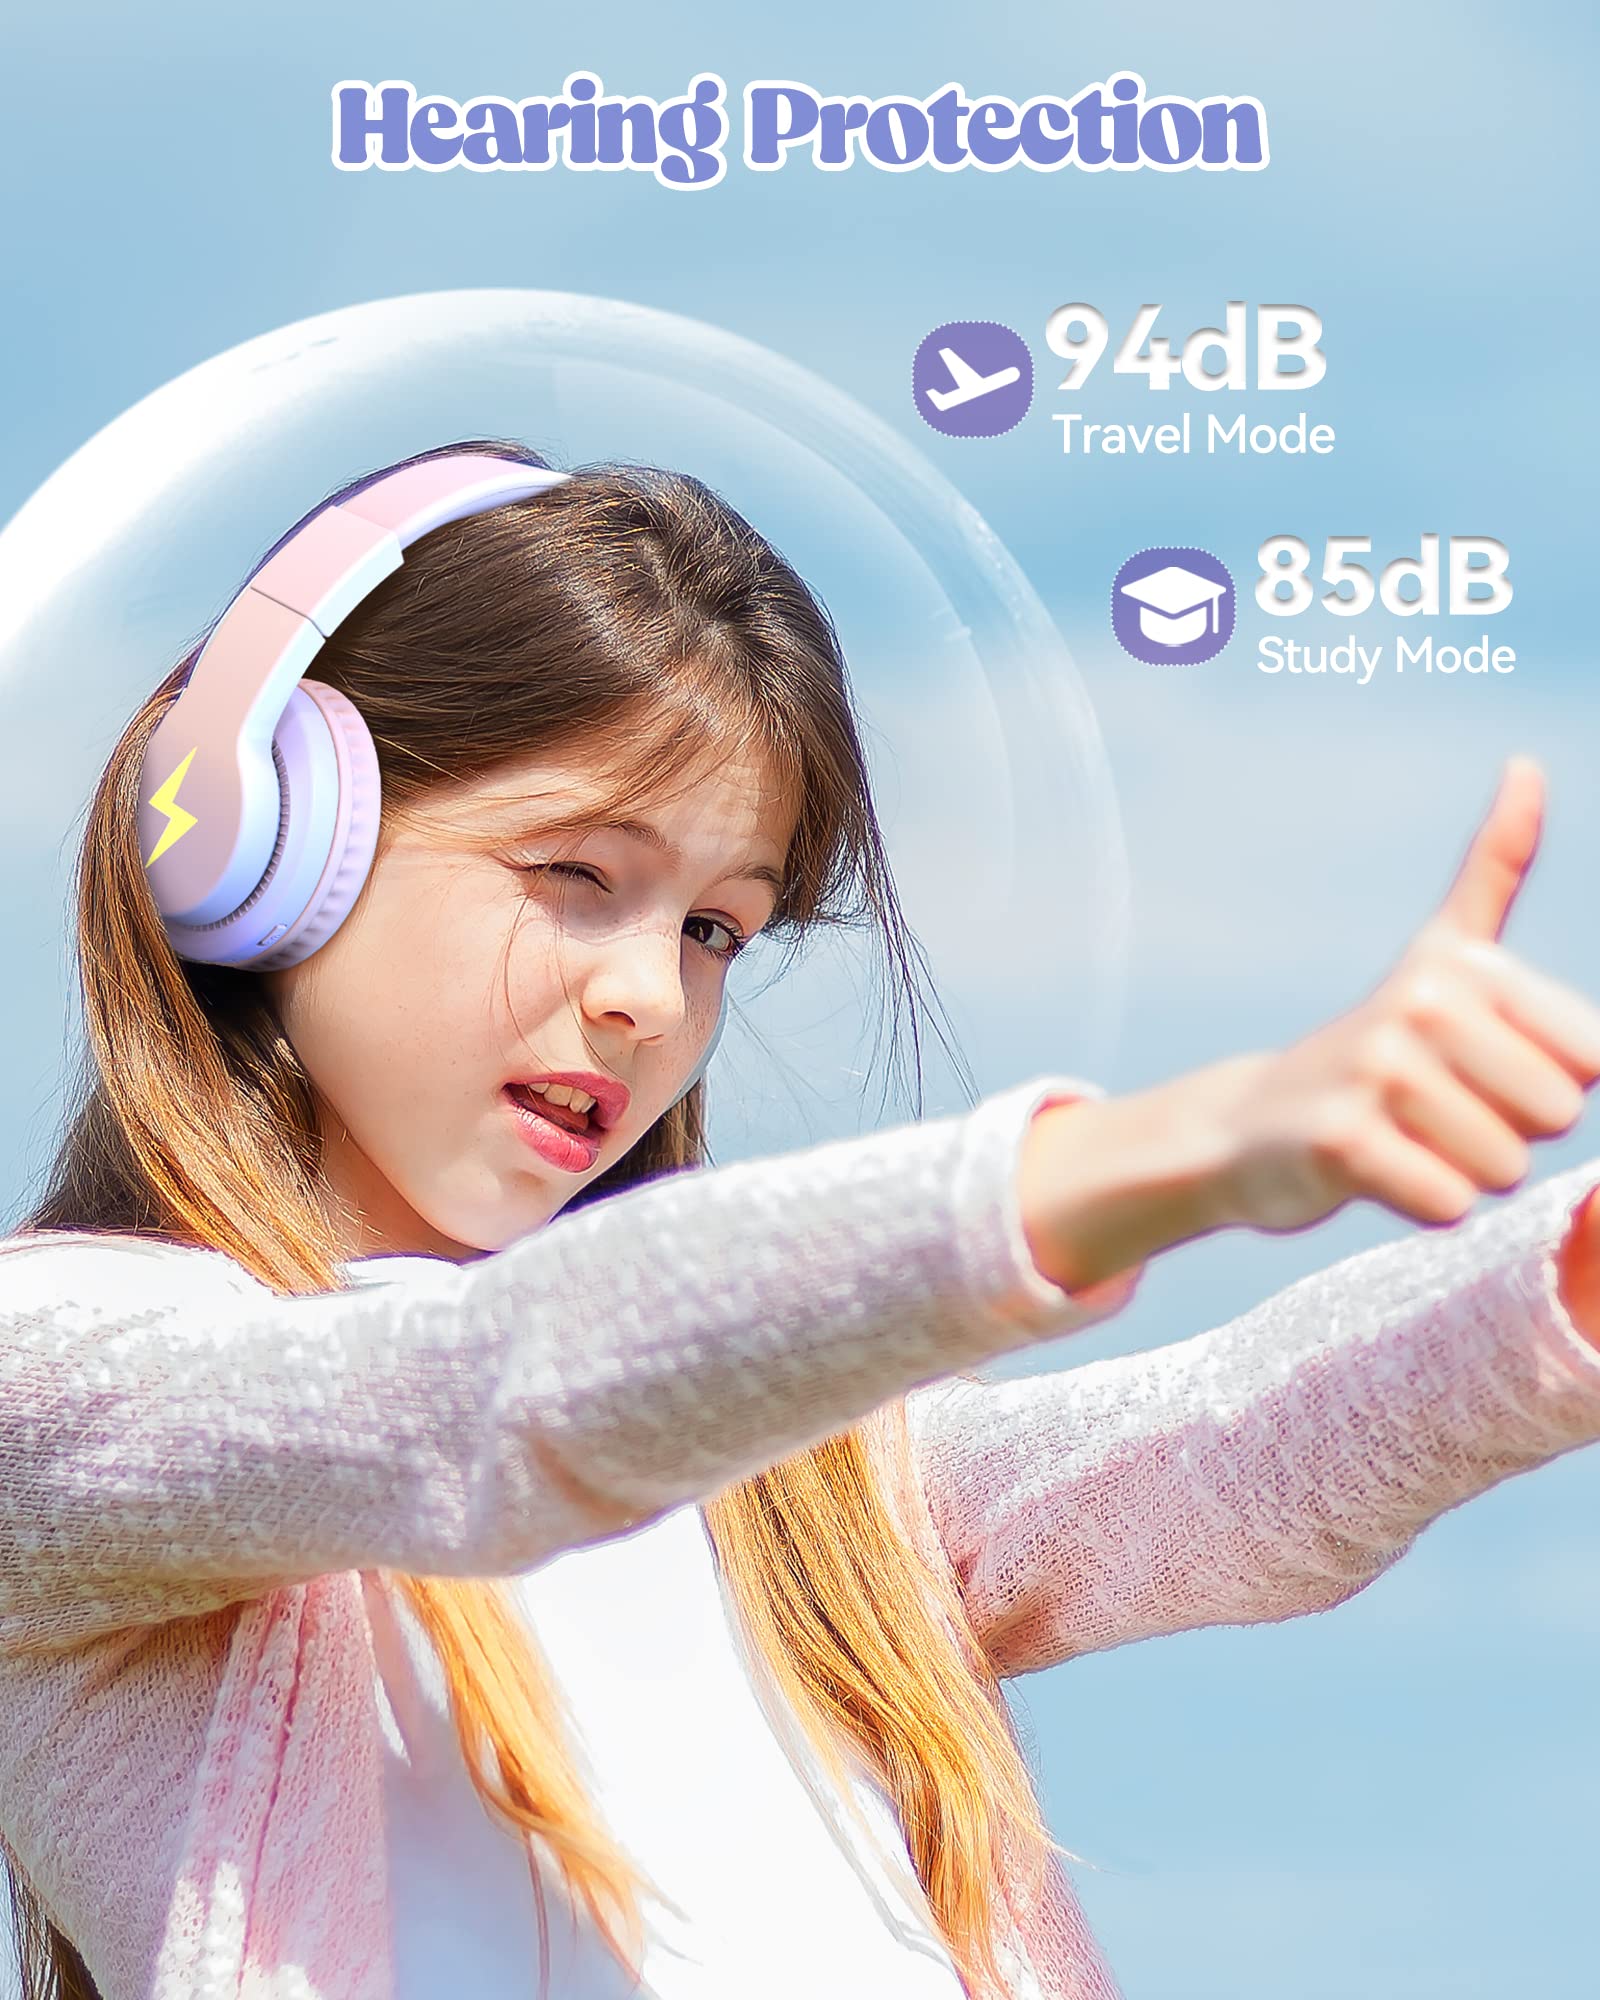 Kids Bluetooth Headphones, Colorful Wireless Over Ear Headset with LED Lights, Built-in Mic, 45H Playtime, 85dB/94dB Volume Limited Headphones for Boys Girls iPad Tablet School Airplane Pink Purple